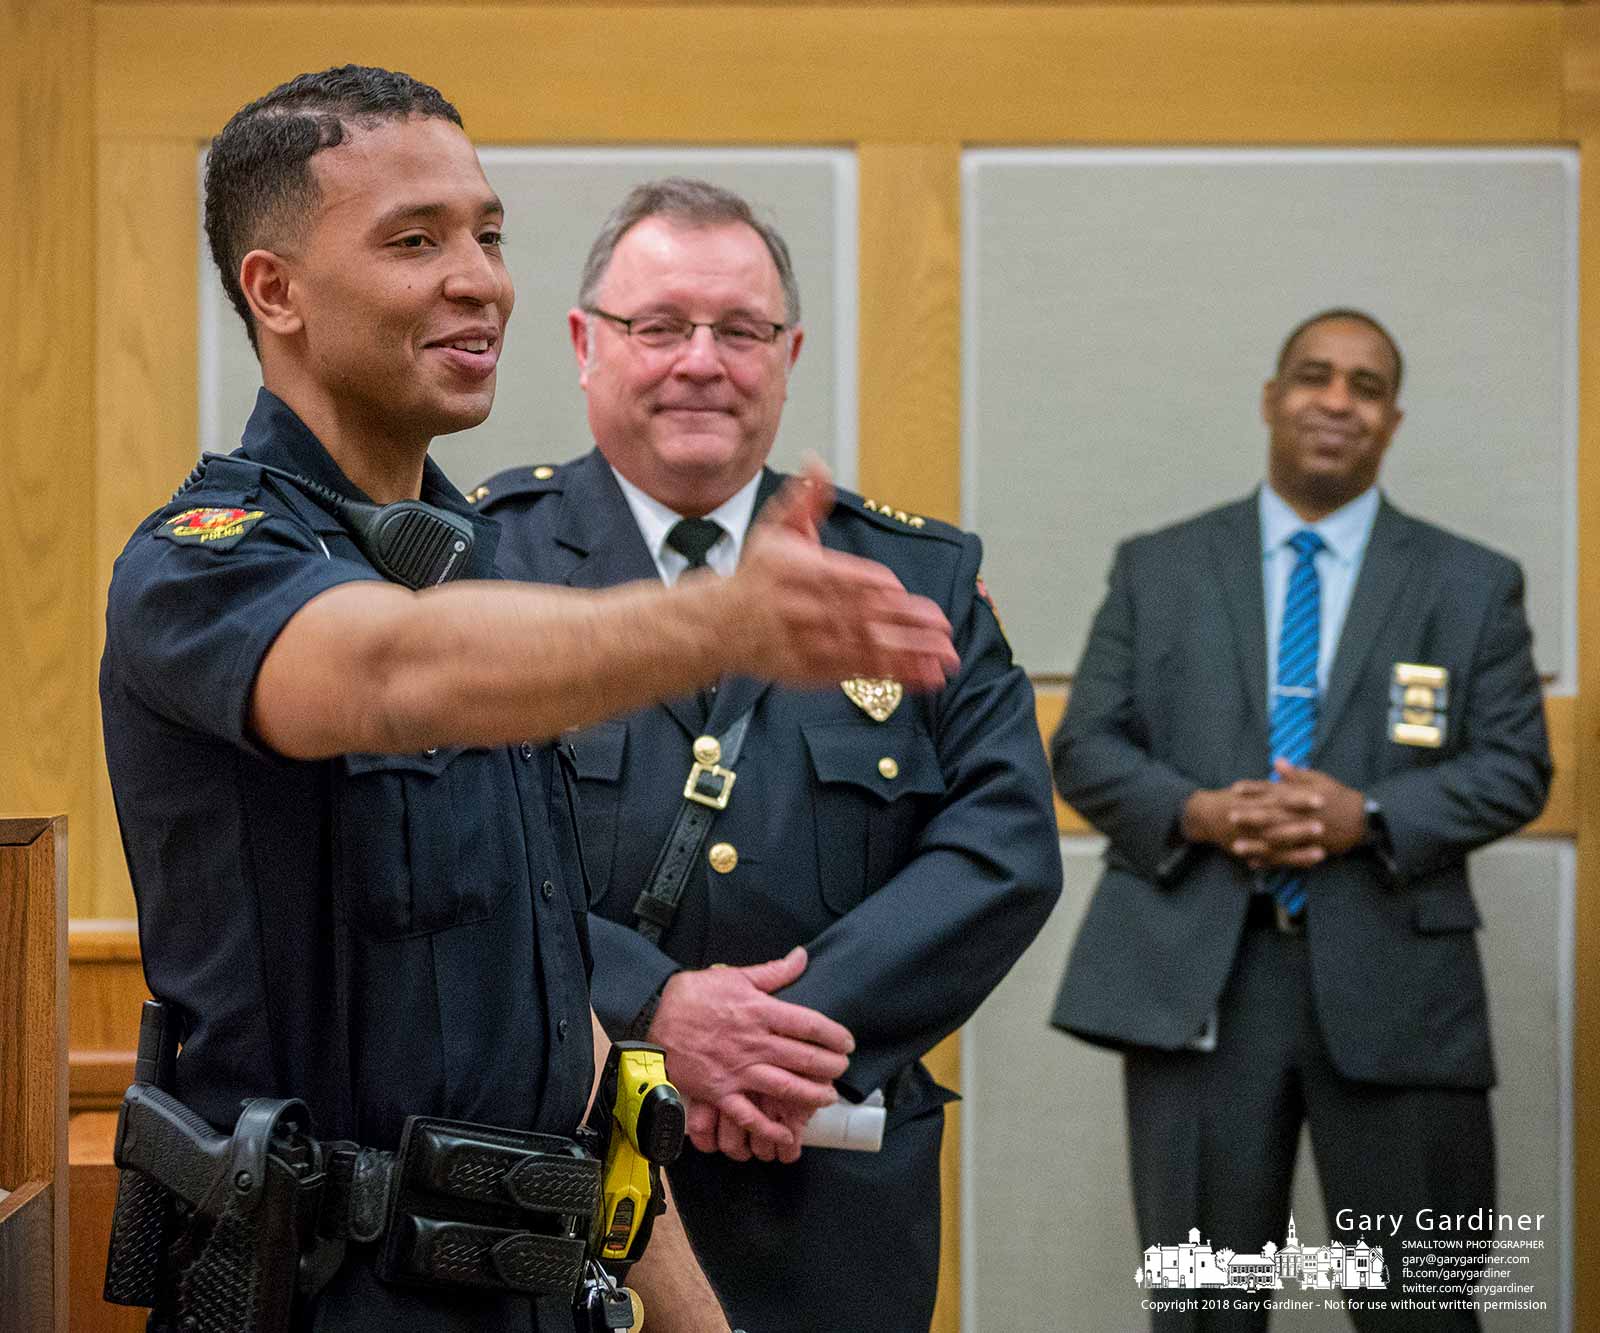 Khyrell Baggoo thanks his family for their support after he was sworn in as Westerville's newest police officer during city council meeting. Behind him is Police Chief Joe Morbitzer. At rear is Asst. Chief Anthony Wilson. My Final Photo for Feb. 20, 2018.